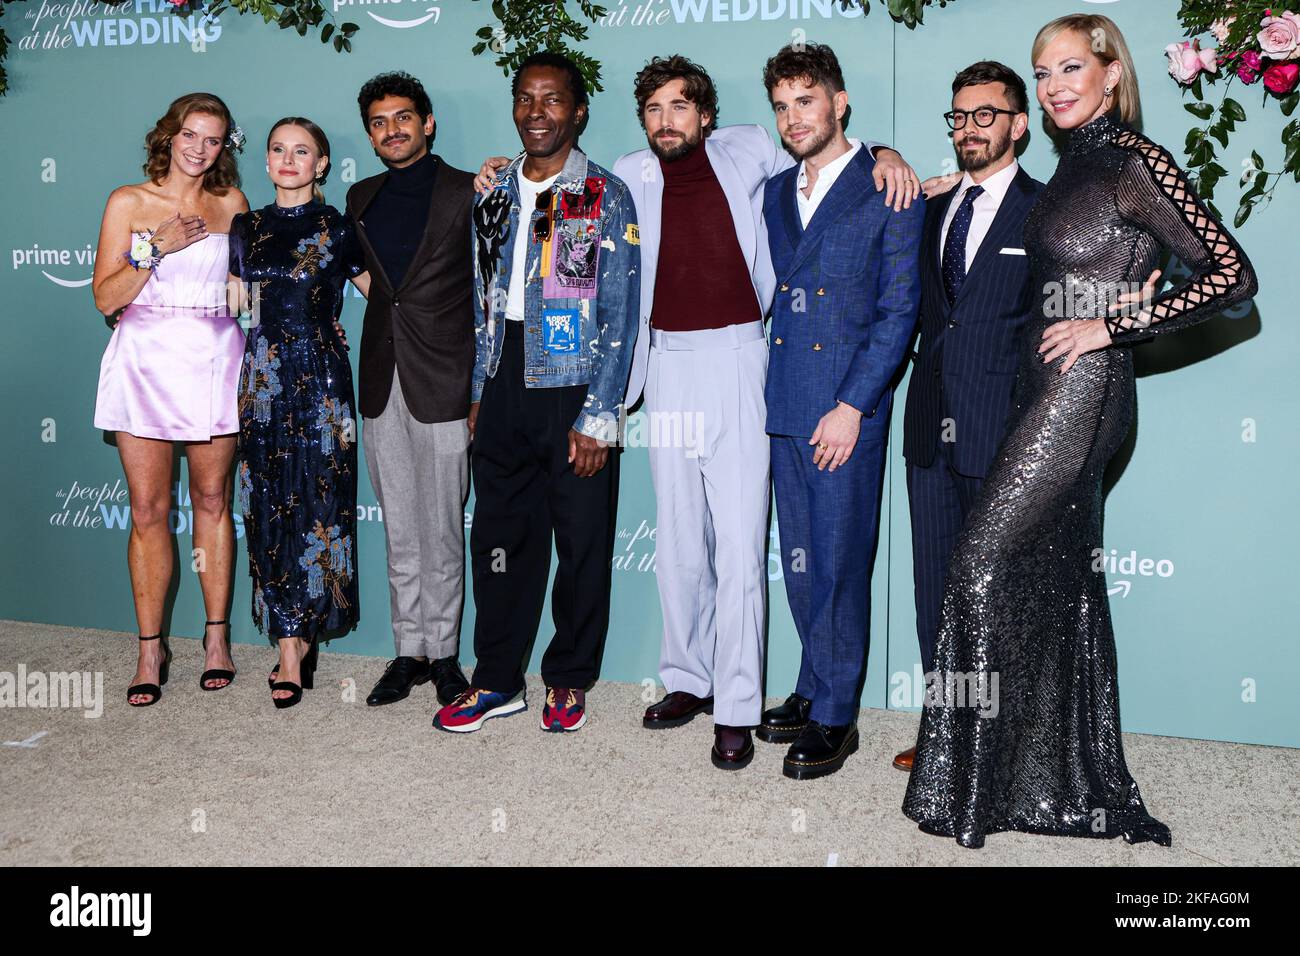 Westwood, United States. 16th Nov, 2022. WESTWOOD, LOS ANGELES, CALIFORNIA, USA - NOVEMBER 16: Claire Scanlon, Kristen Bell, Karan Soni, Isaach de Bankole, Dustin Milligan, Ben Platt, Jorma Taccone and Allison Janney arrive at the Los Angeles Premiere Of Amazon Prime Video's 'The People We Hate At The Wedding' held at the Regency Village Theatre on November 16, 2022 in Westwood, Los Angeles, California, United States. (Photo by Rudy Torres/Image Press Agency) Credit: Image Press Agency/Alamy Live News Stock Photo